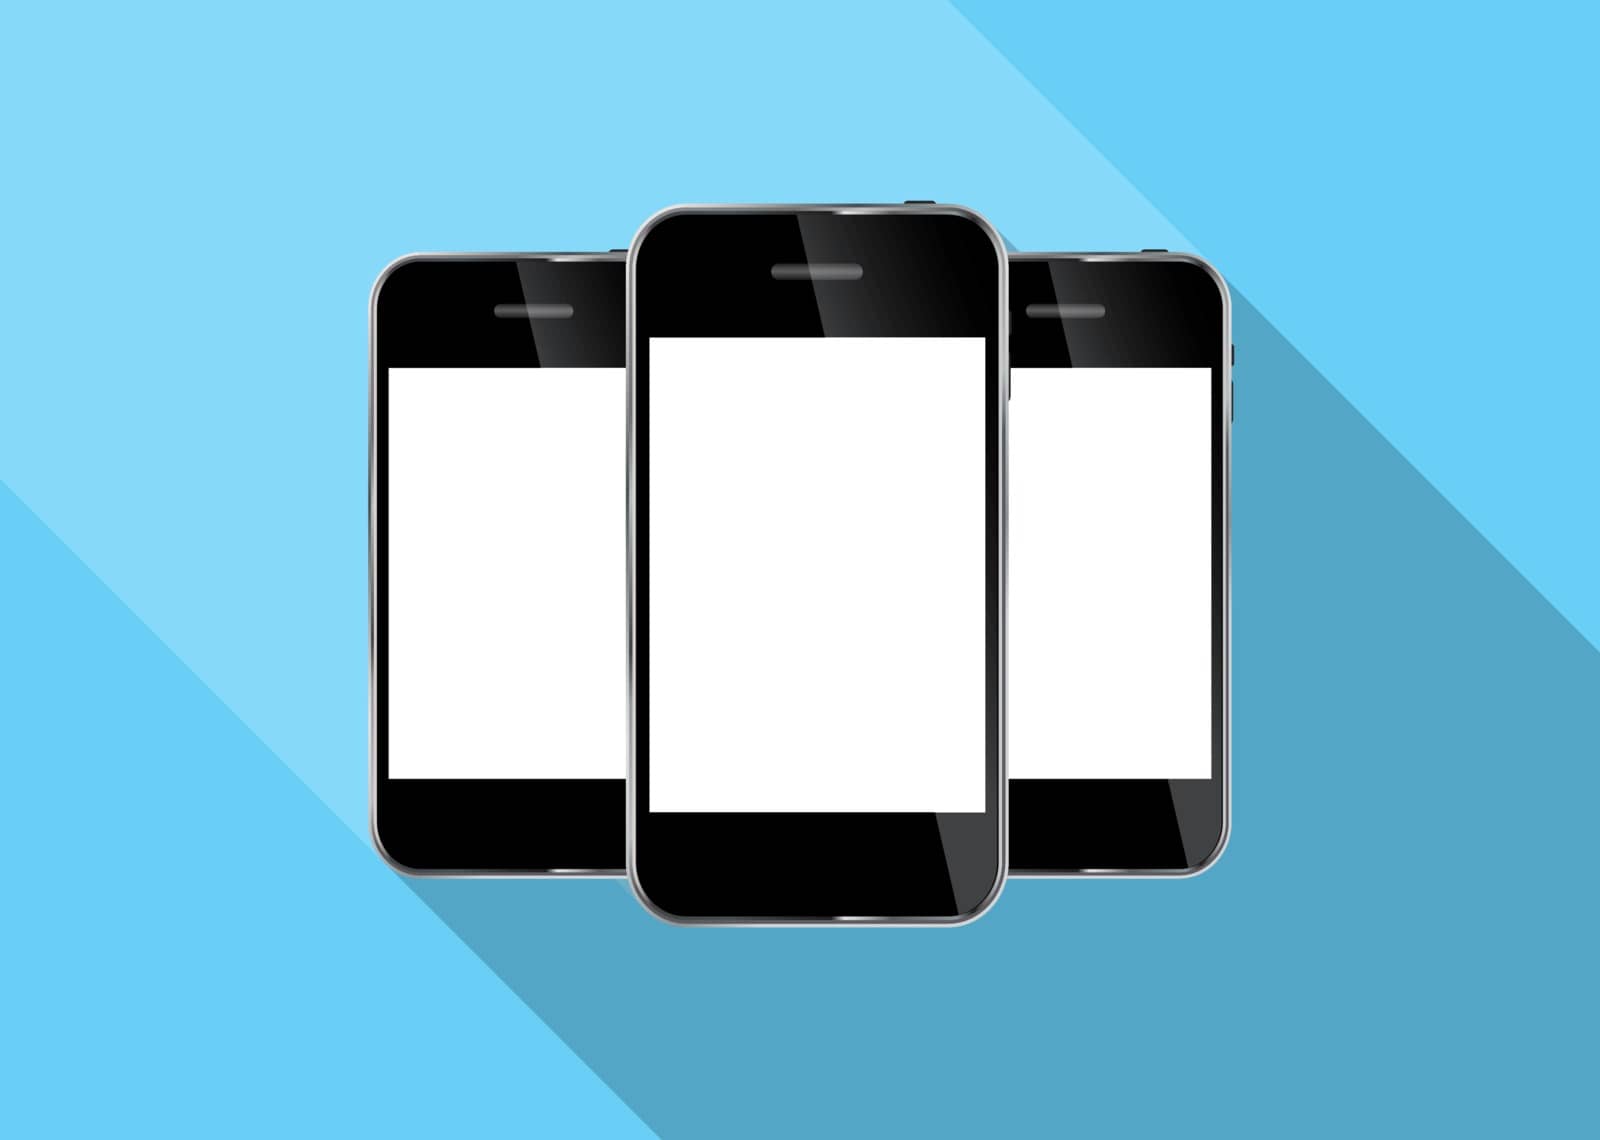 Abstract Design Realistic Mobile Phone Vector Illustration